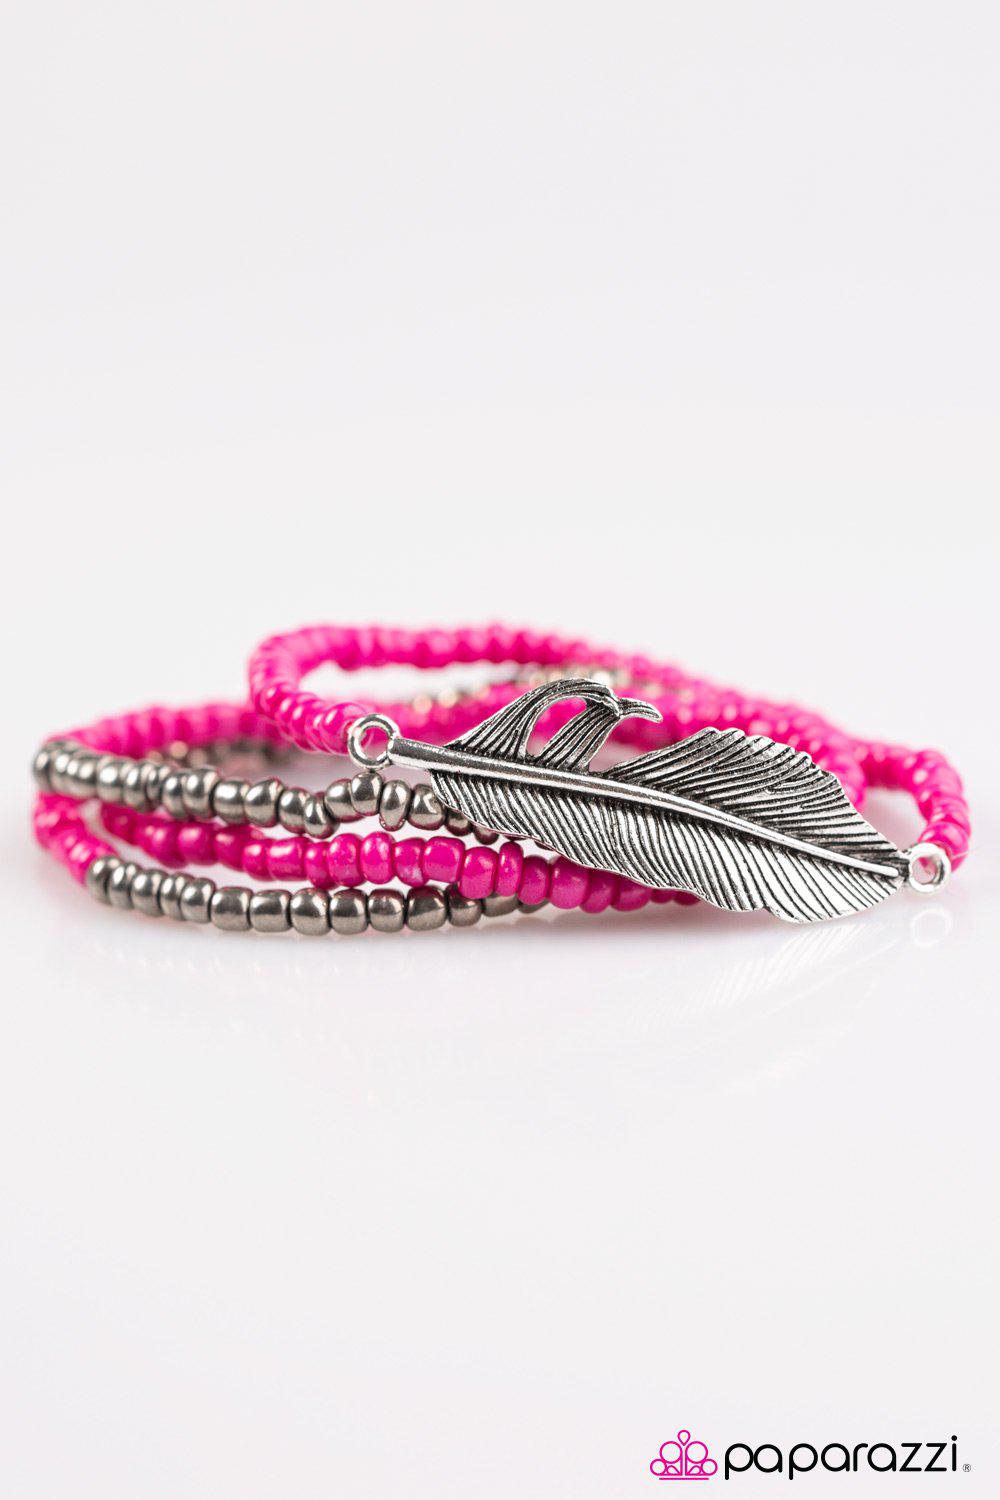 Thunderbird Pink and Metallic Bead and Feather Bracelet Set - Paparazzi Accessories-CarasShop.com - $5 Jewelry by Cara Jewels